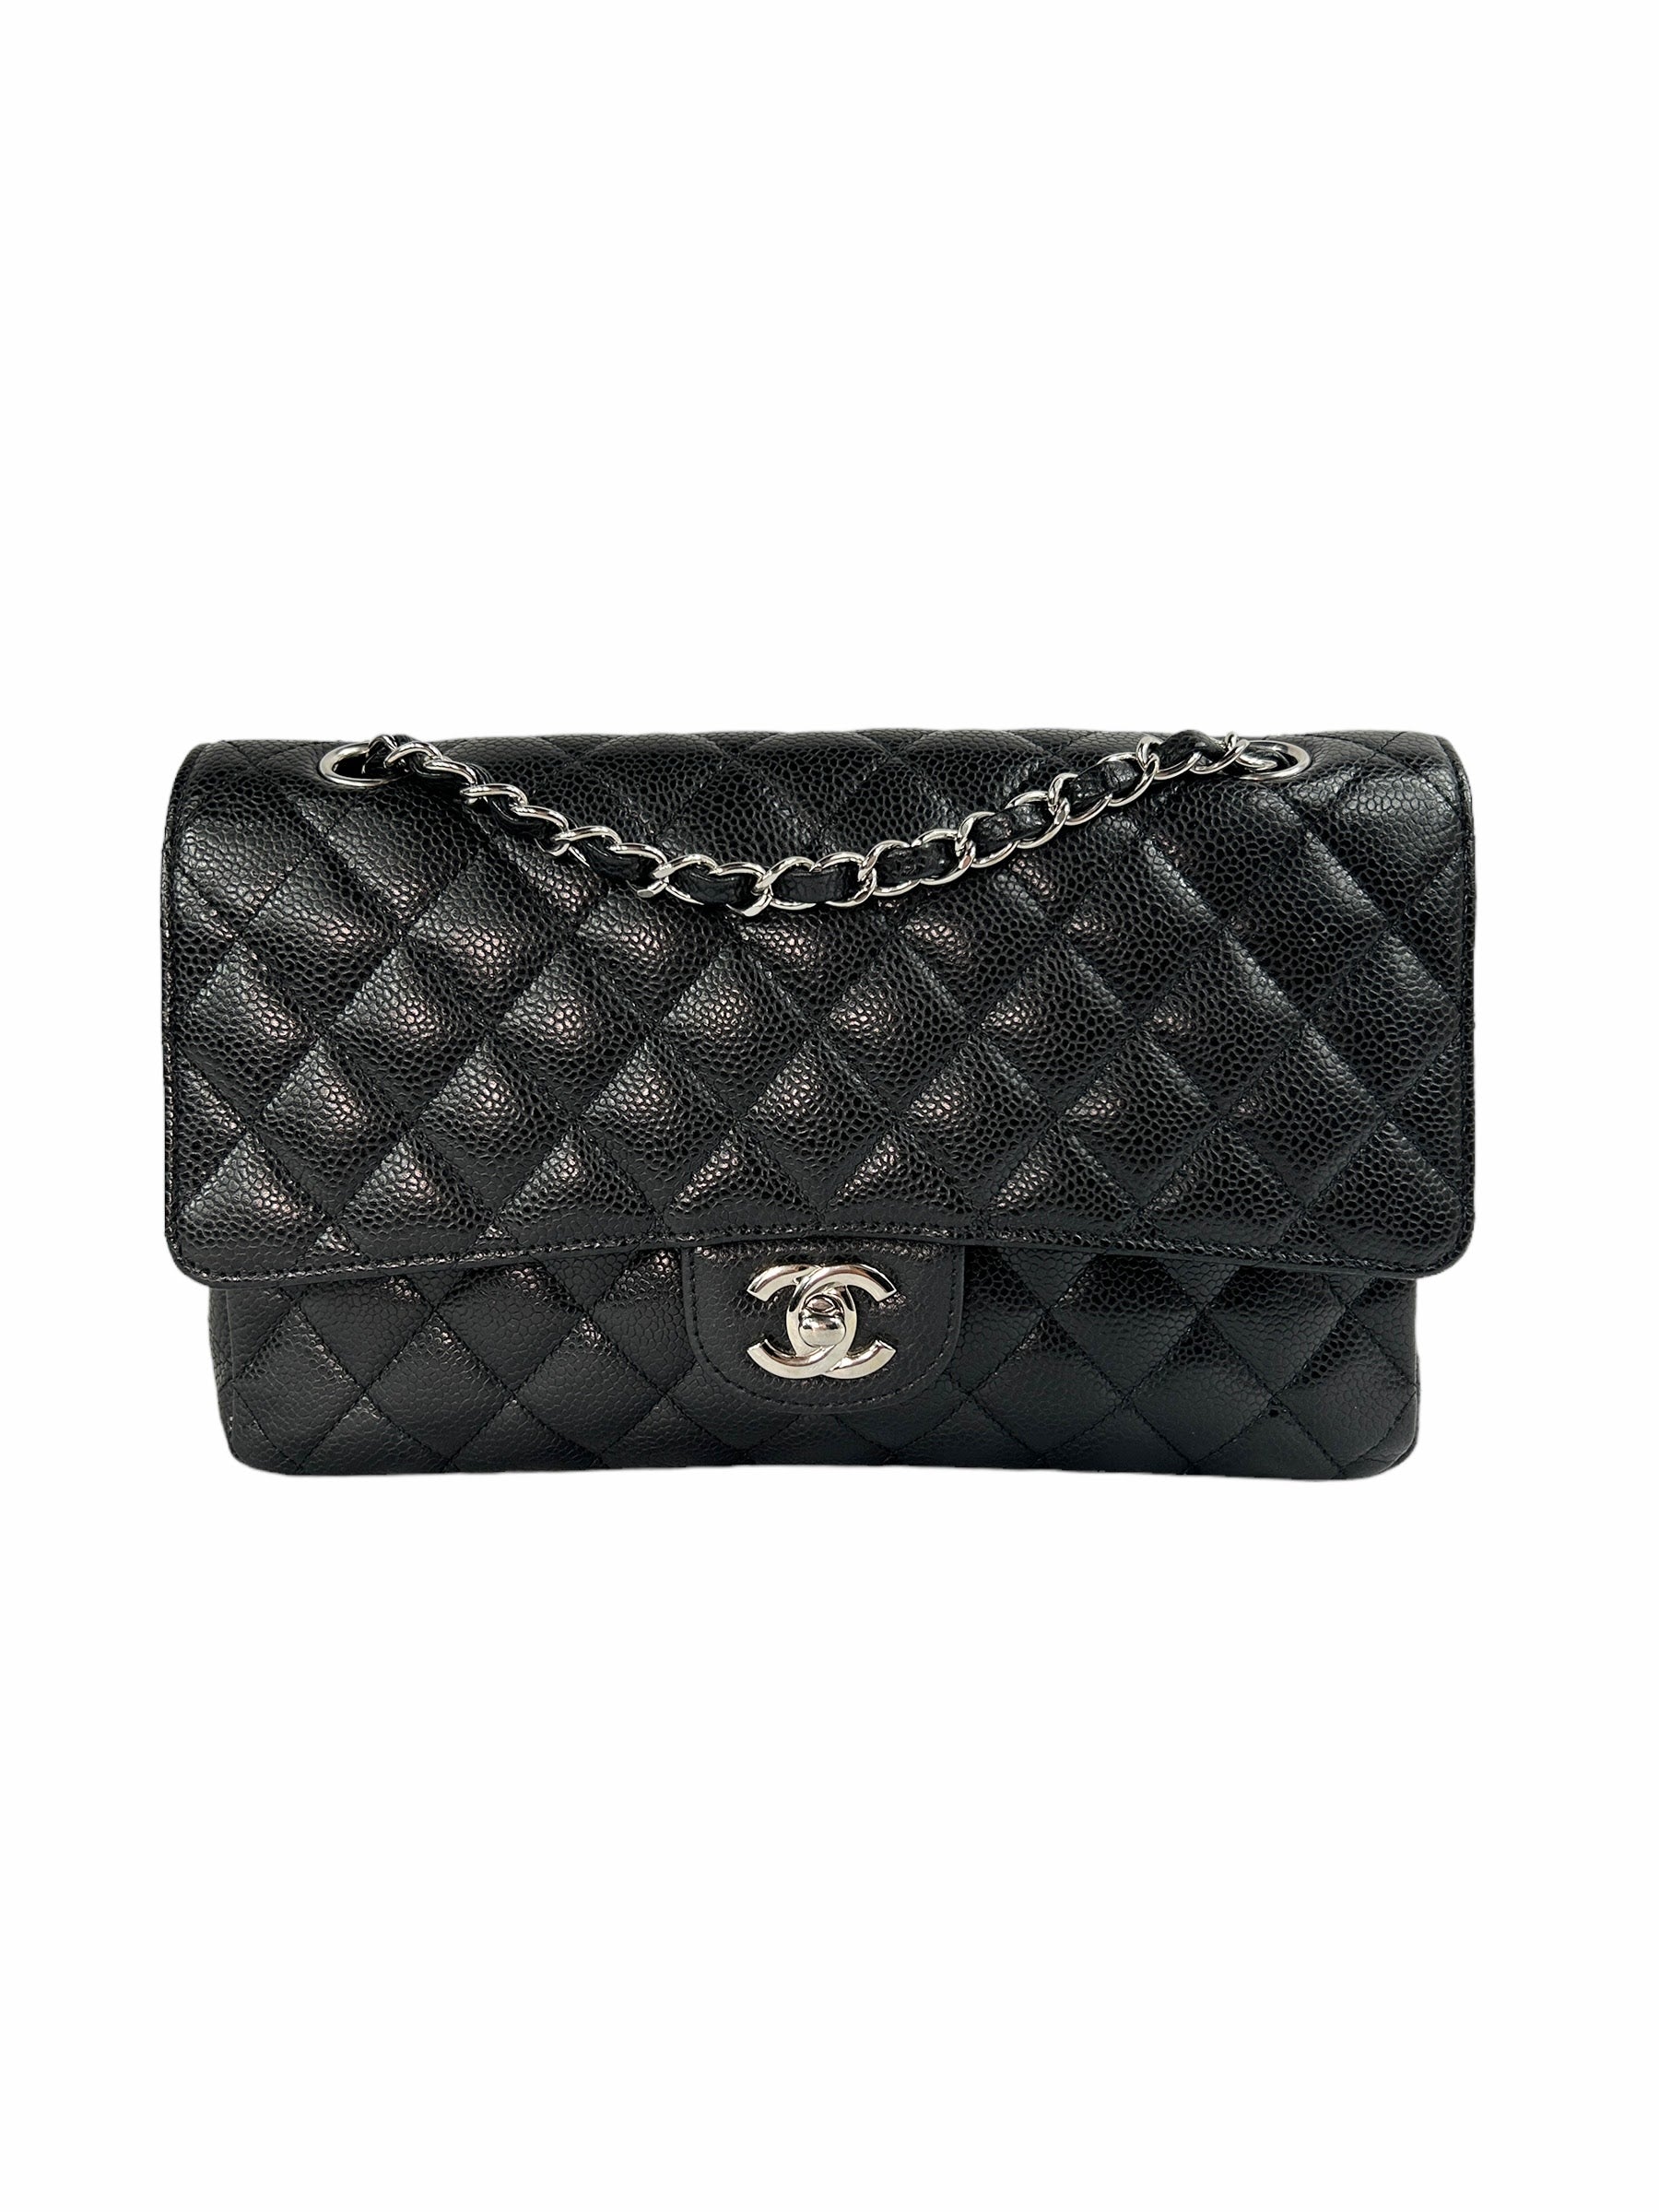 Black Quilted Caviar Double Classic Medium Flap Bag w/SHW- PENDING